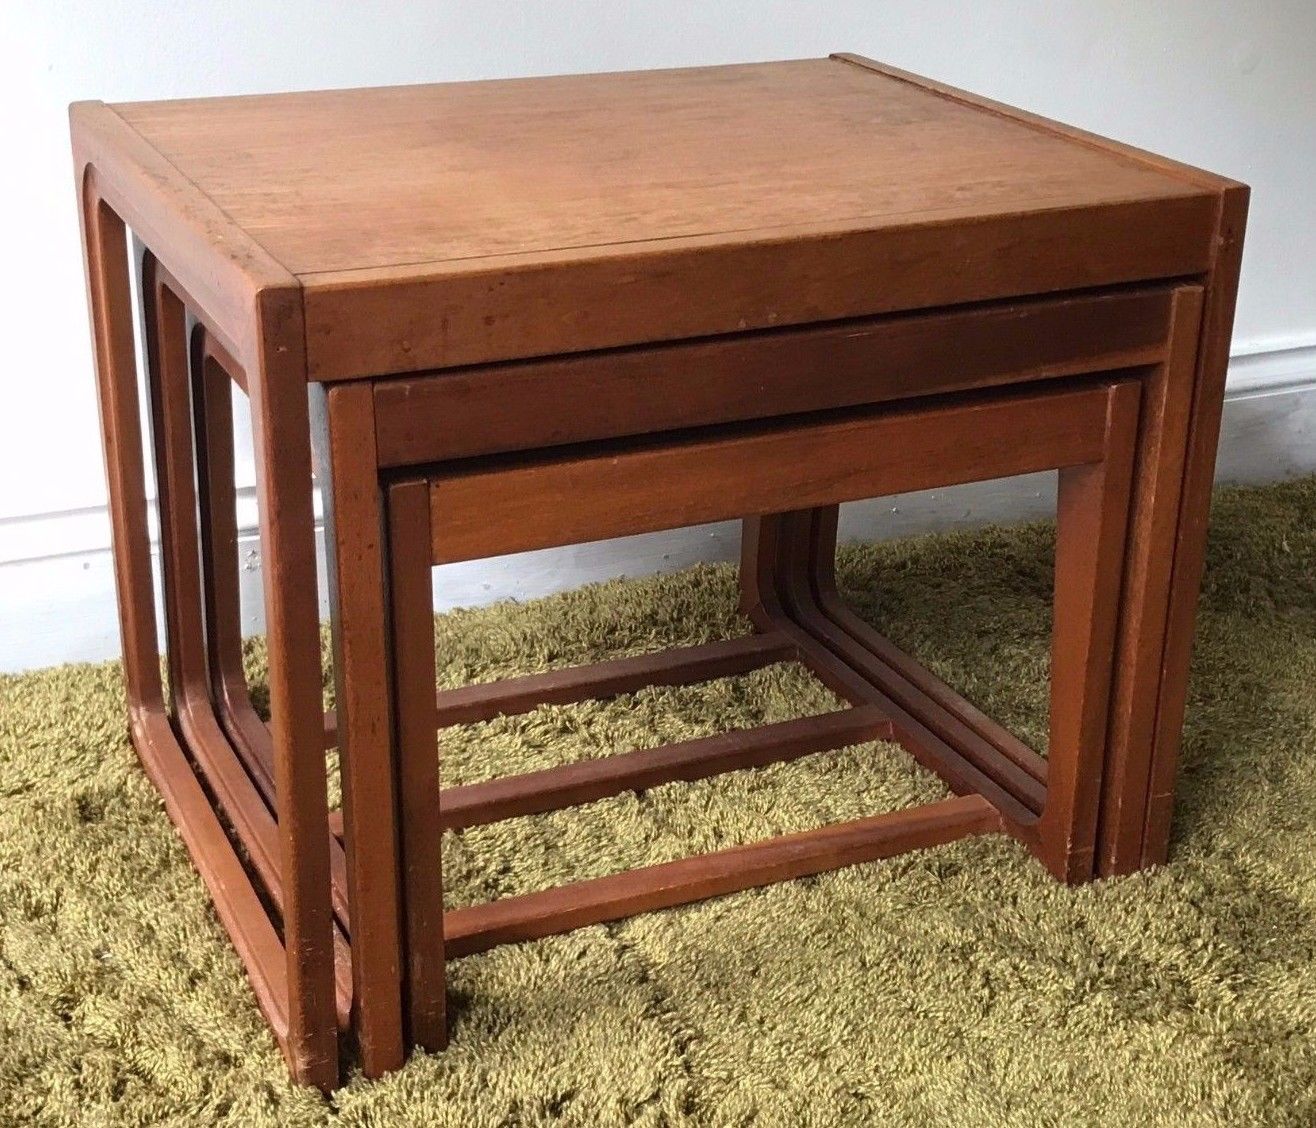 Vintage Remploy nest of tables, mid-century modern, retro coffee tables